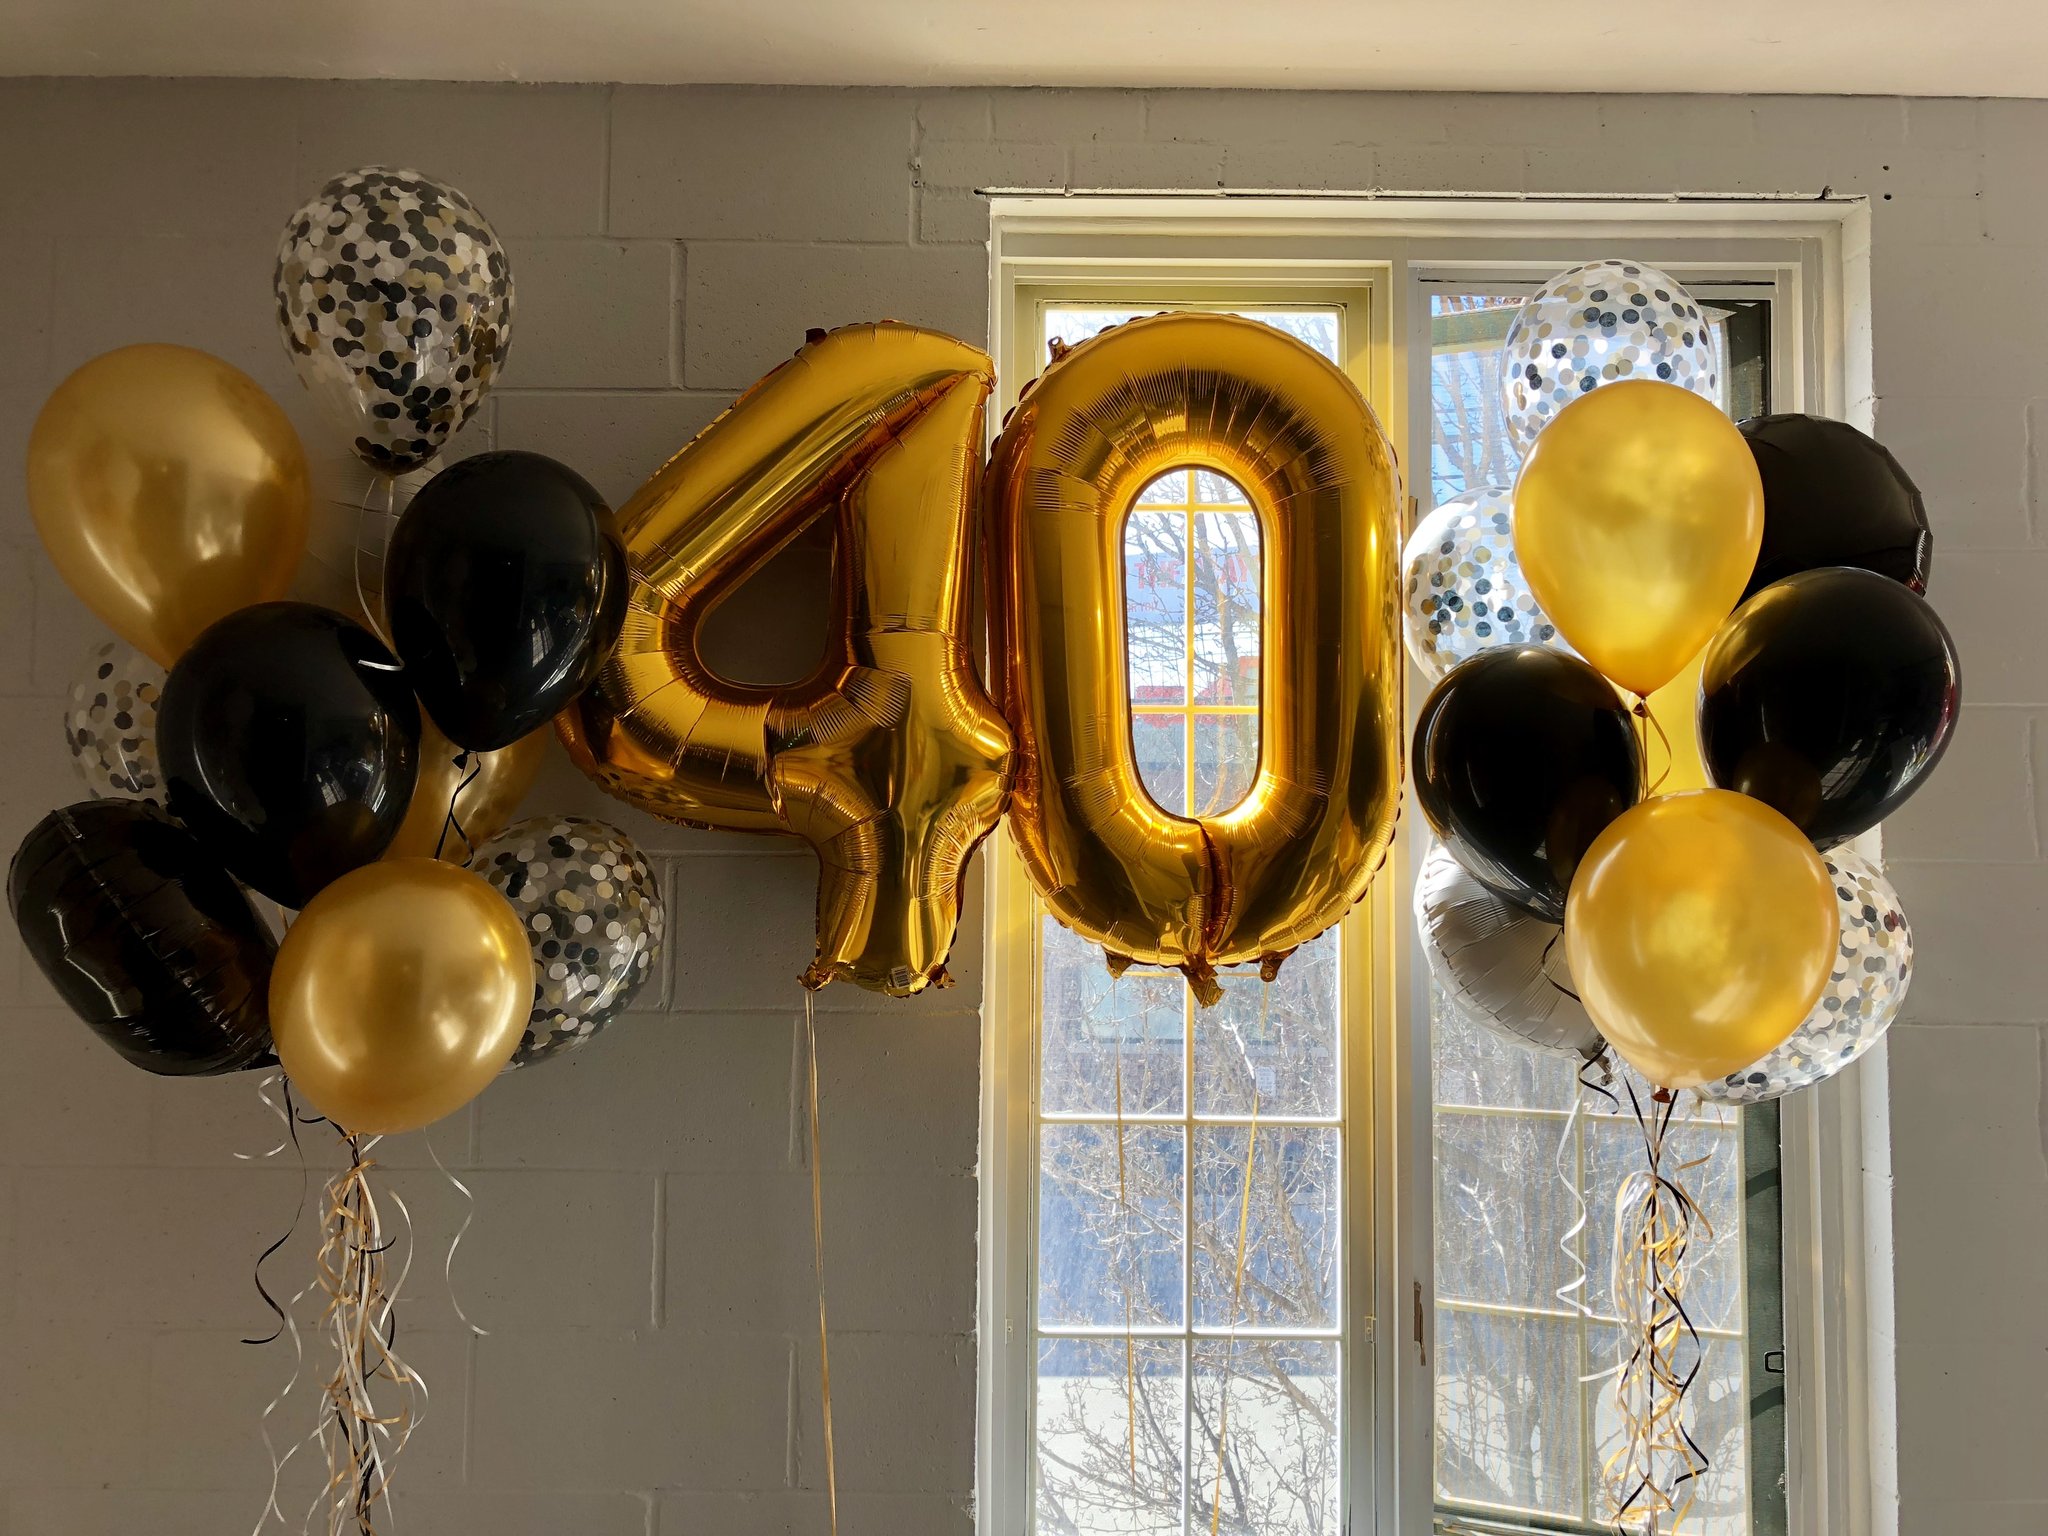 Buy Number Balloons For Counting Your Friend s Birth Year